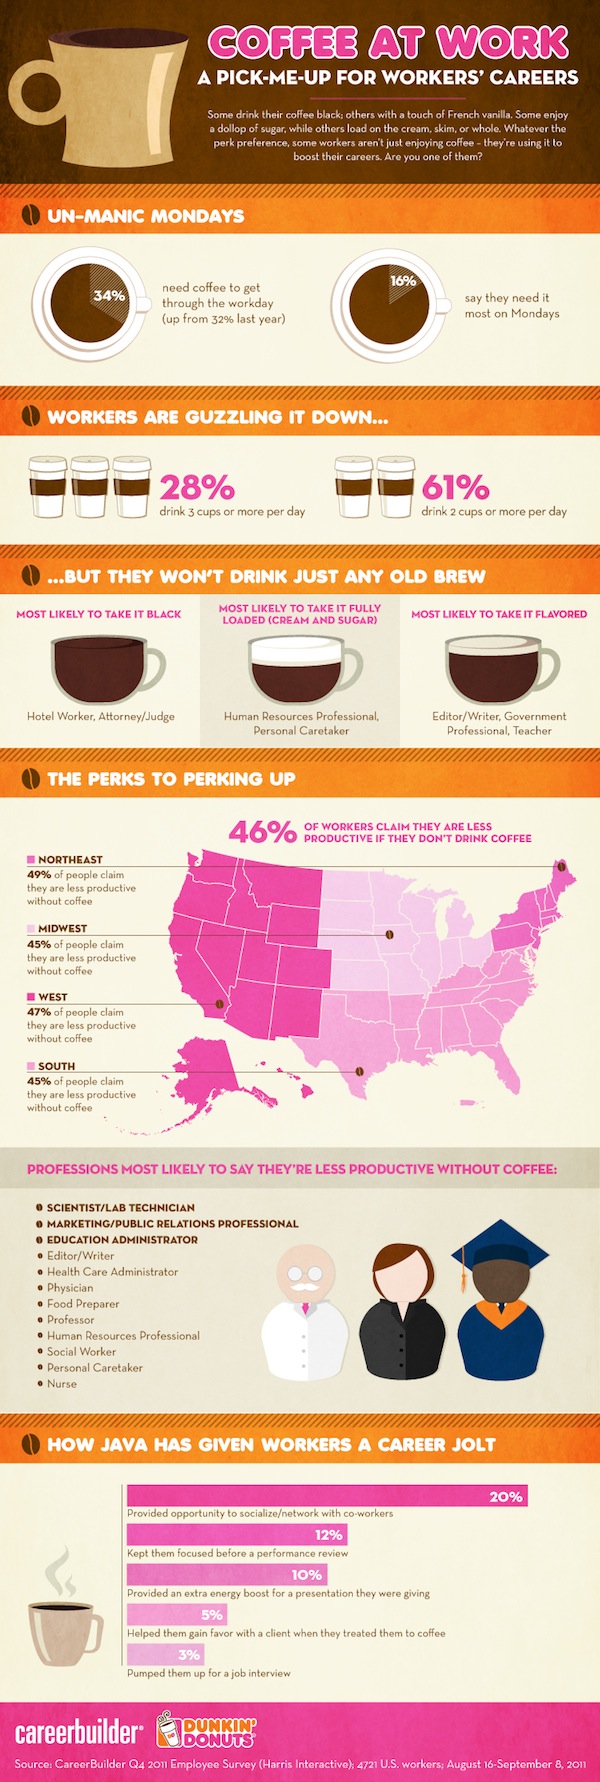 coffee at work infographic full